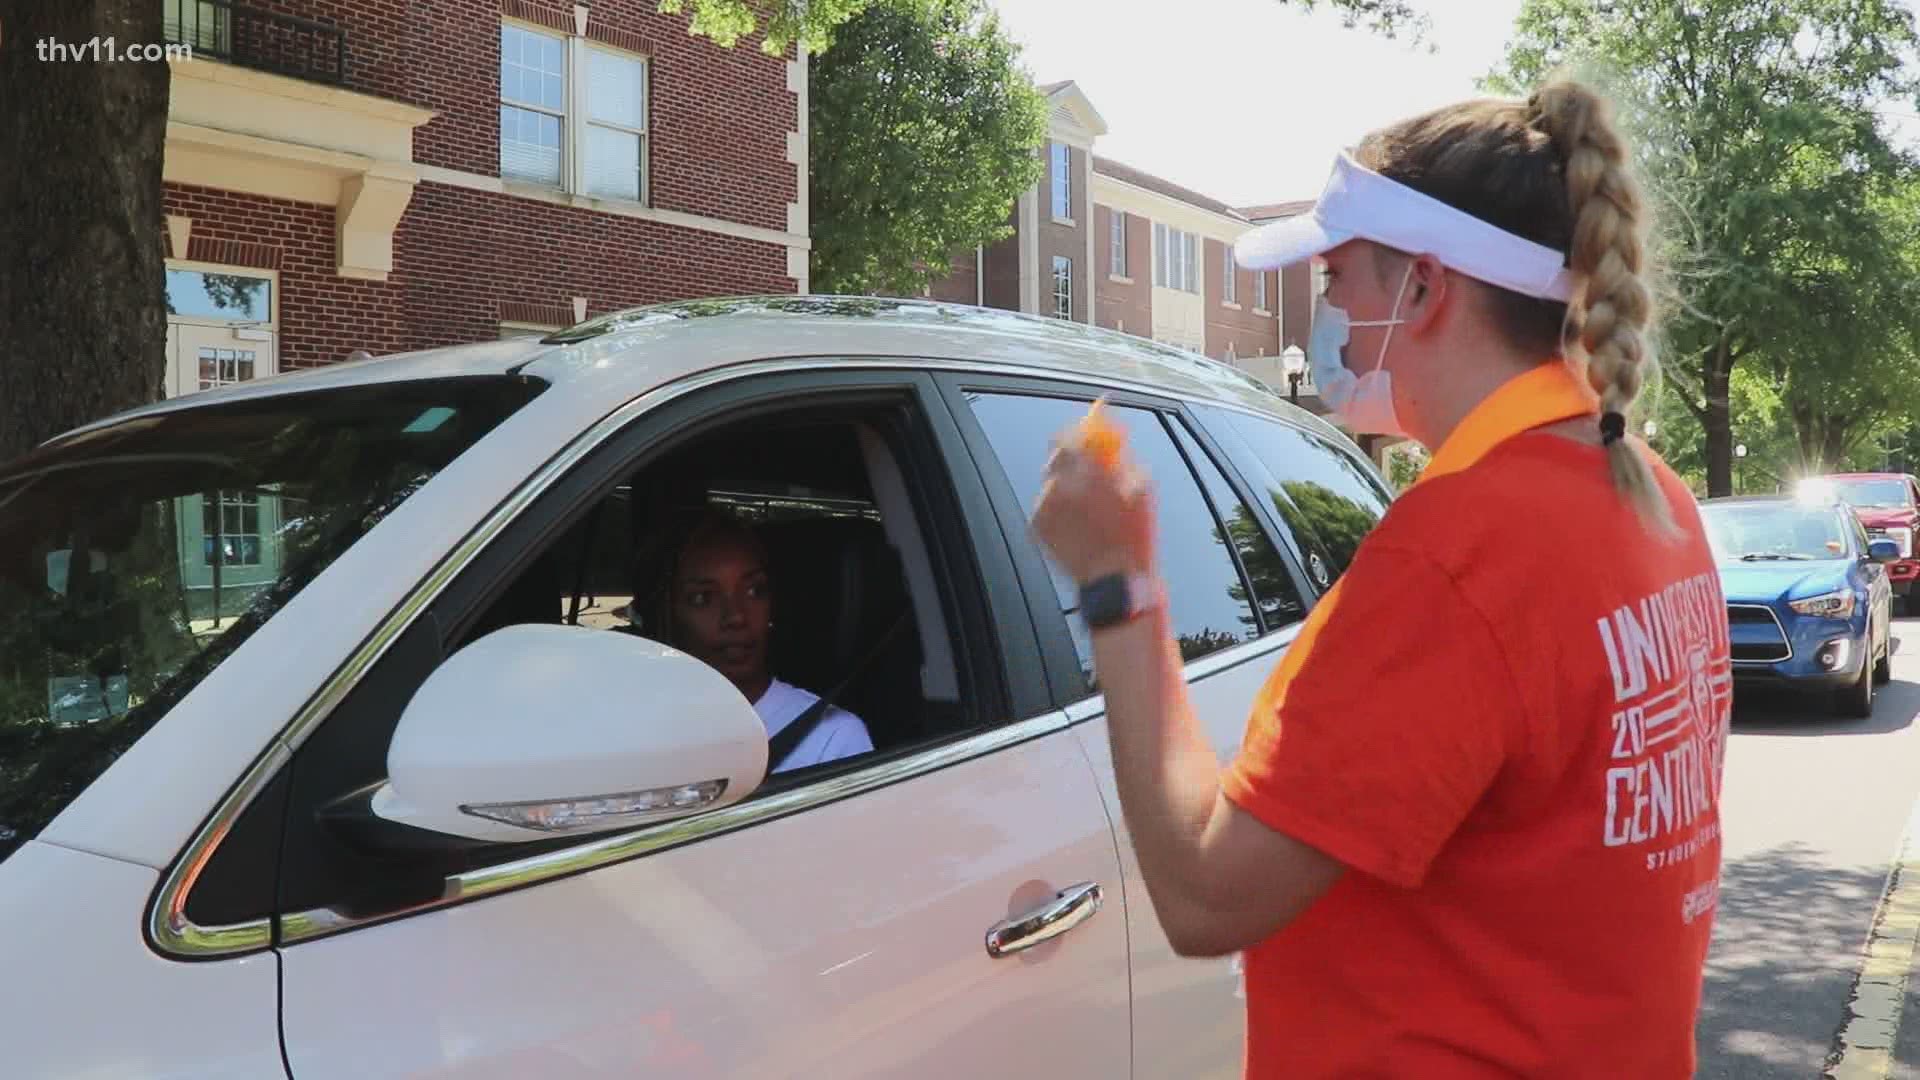 Typically the move-in process is one day, but this year it was split into two, so they could limit the number of cars and students coming through.